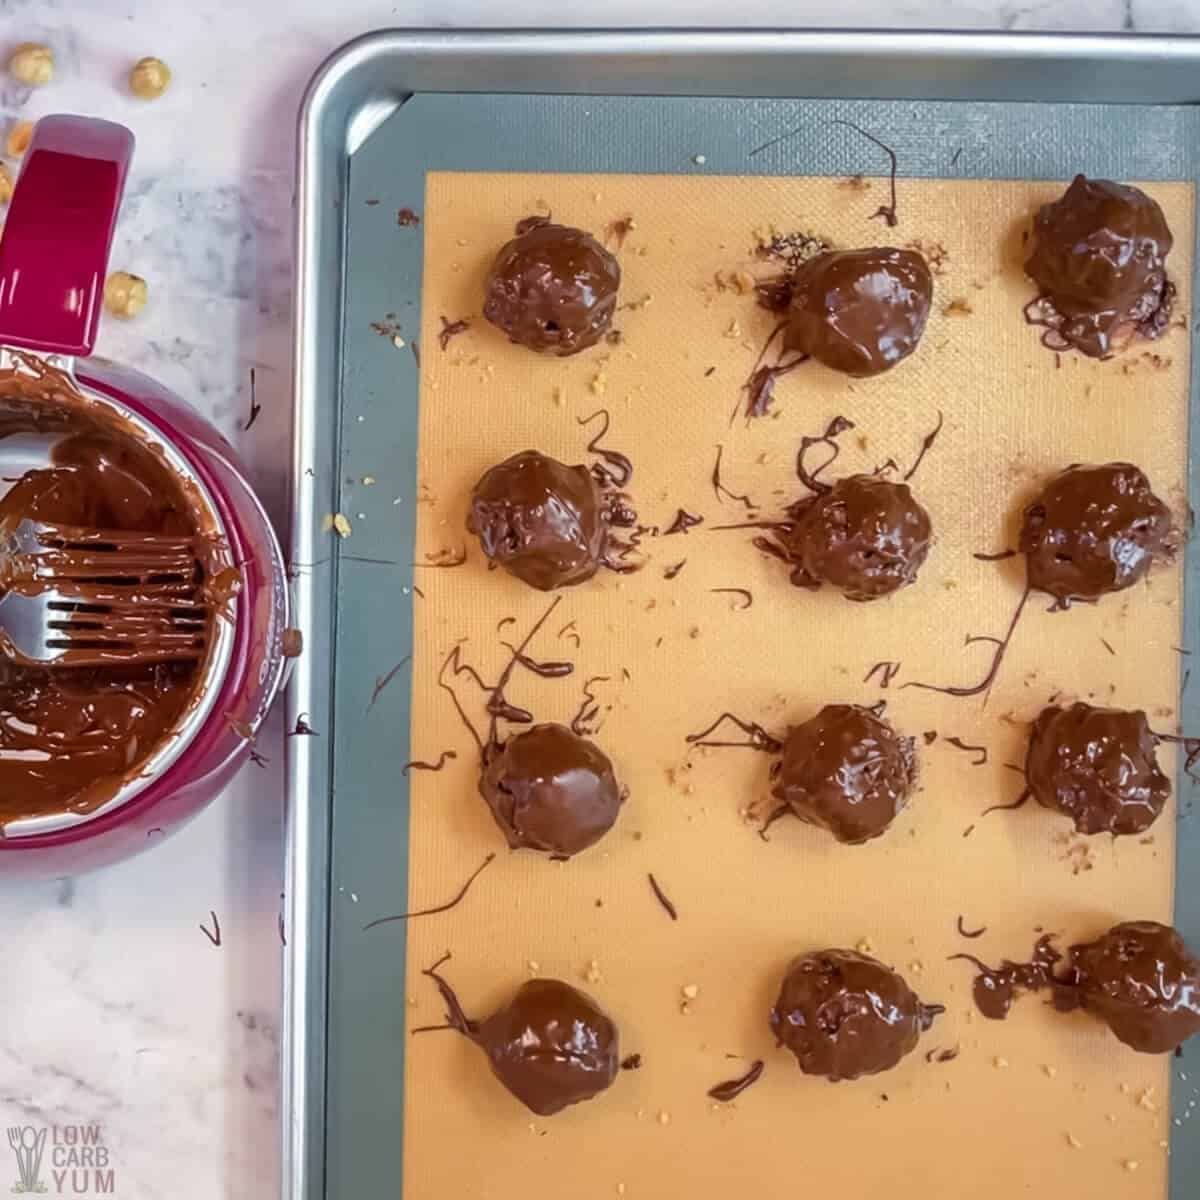 balls coated in melted milk chocolate